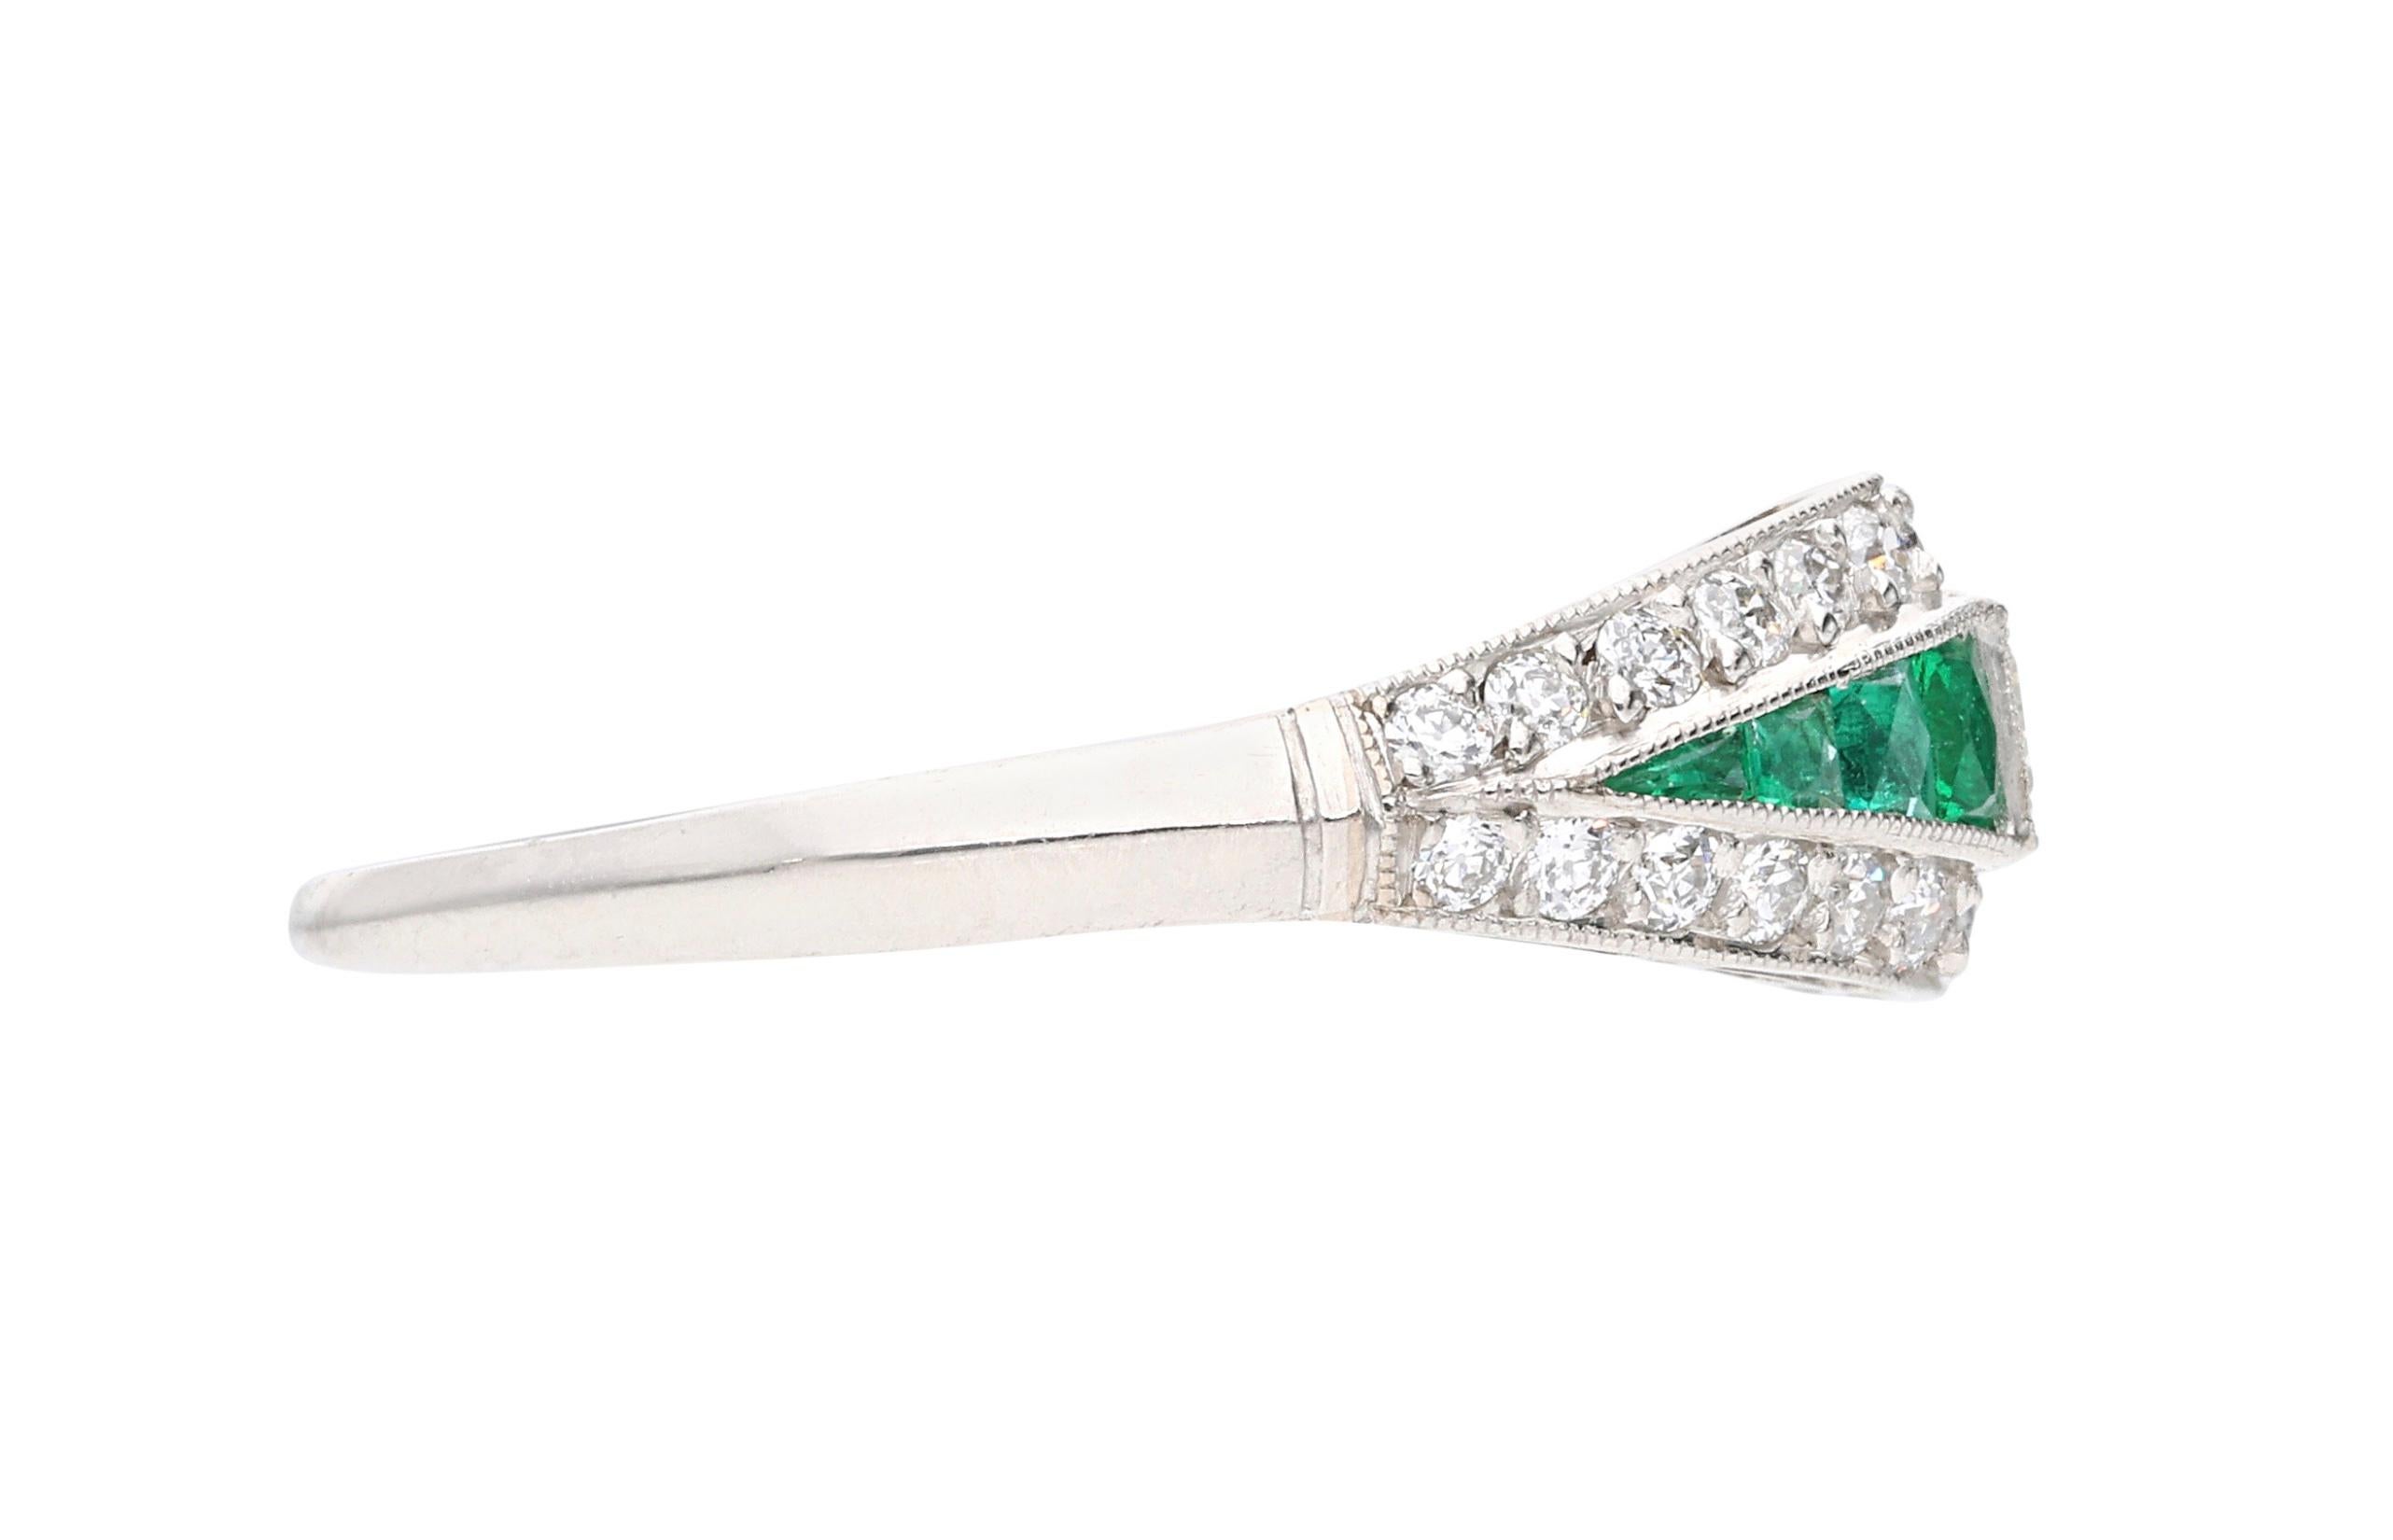 Centering a baguette-shaped diamond, this ring is accented by round brilliant cut diamonds and tapered emeralds.

- Center diamond weighs approximately 0.40 carat
- Round diamonds weigh a total of approximately 0.70 carat
- Platinum
- Total weight